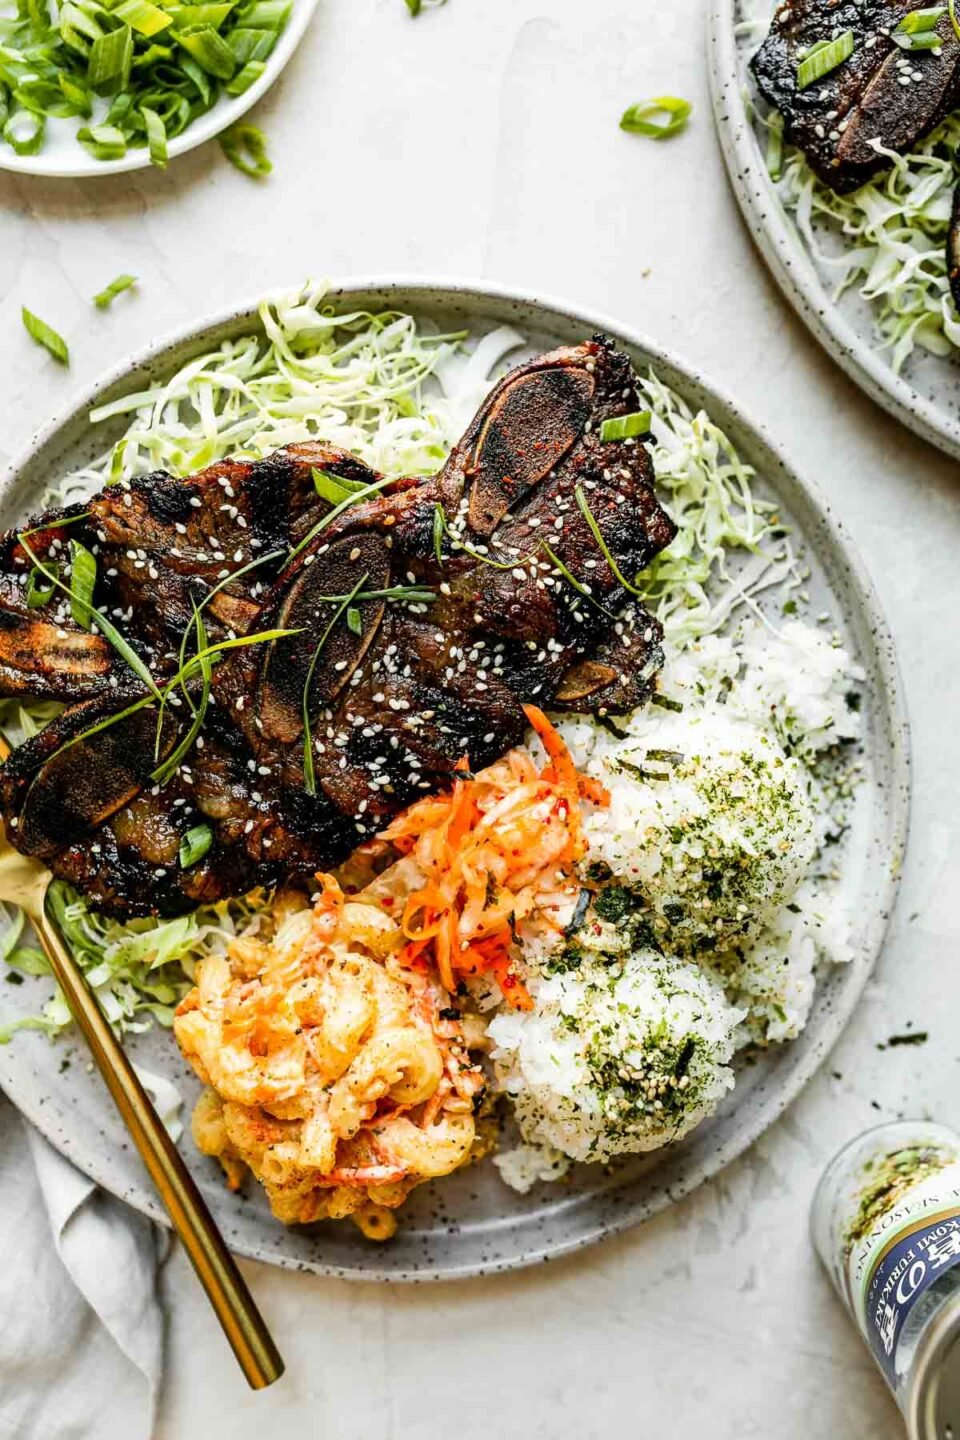 Kalbi served local Hawaiian-style, plated with shredded cabbage & scoops of rice, mac salad, & kimchi. The plate sits atop a cement surface alongside a second plate of kalbi, nori furikake seasoning, a gray linen napkin, & a plate of thin sliced green onions.